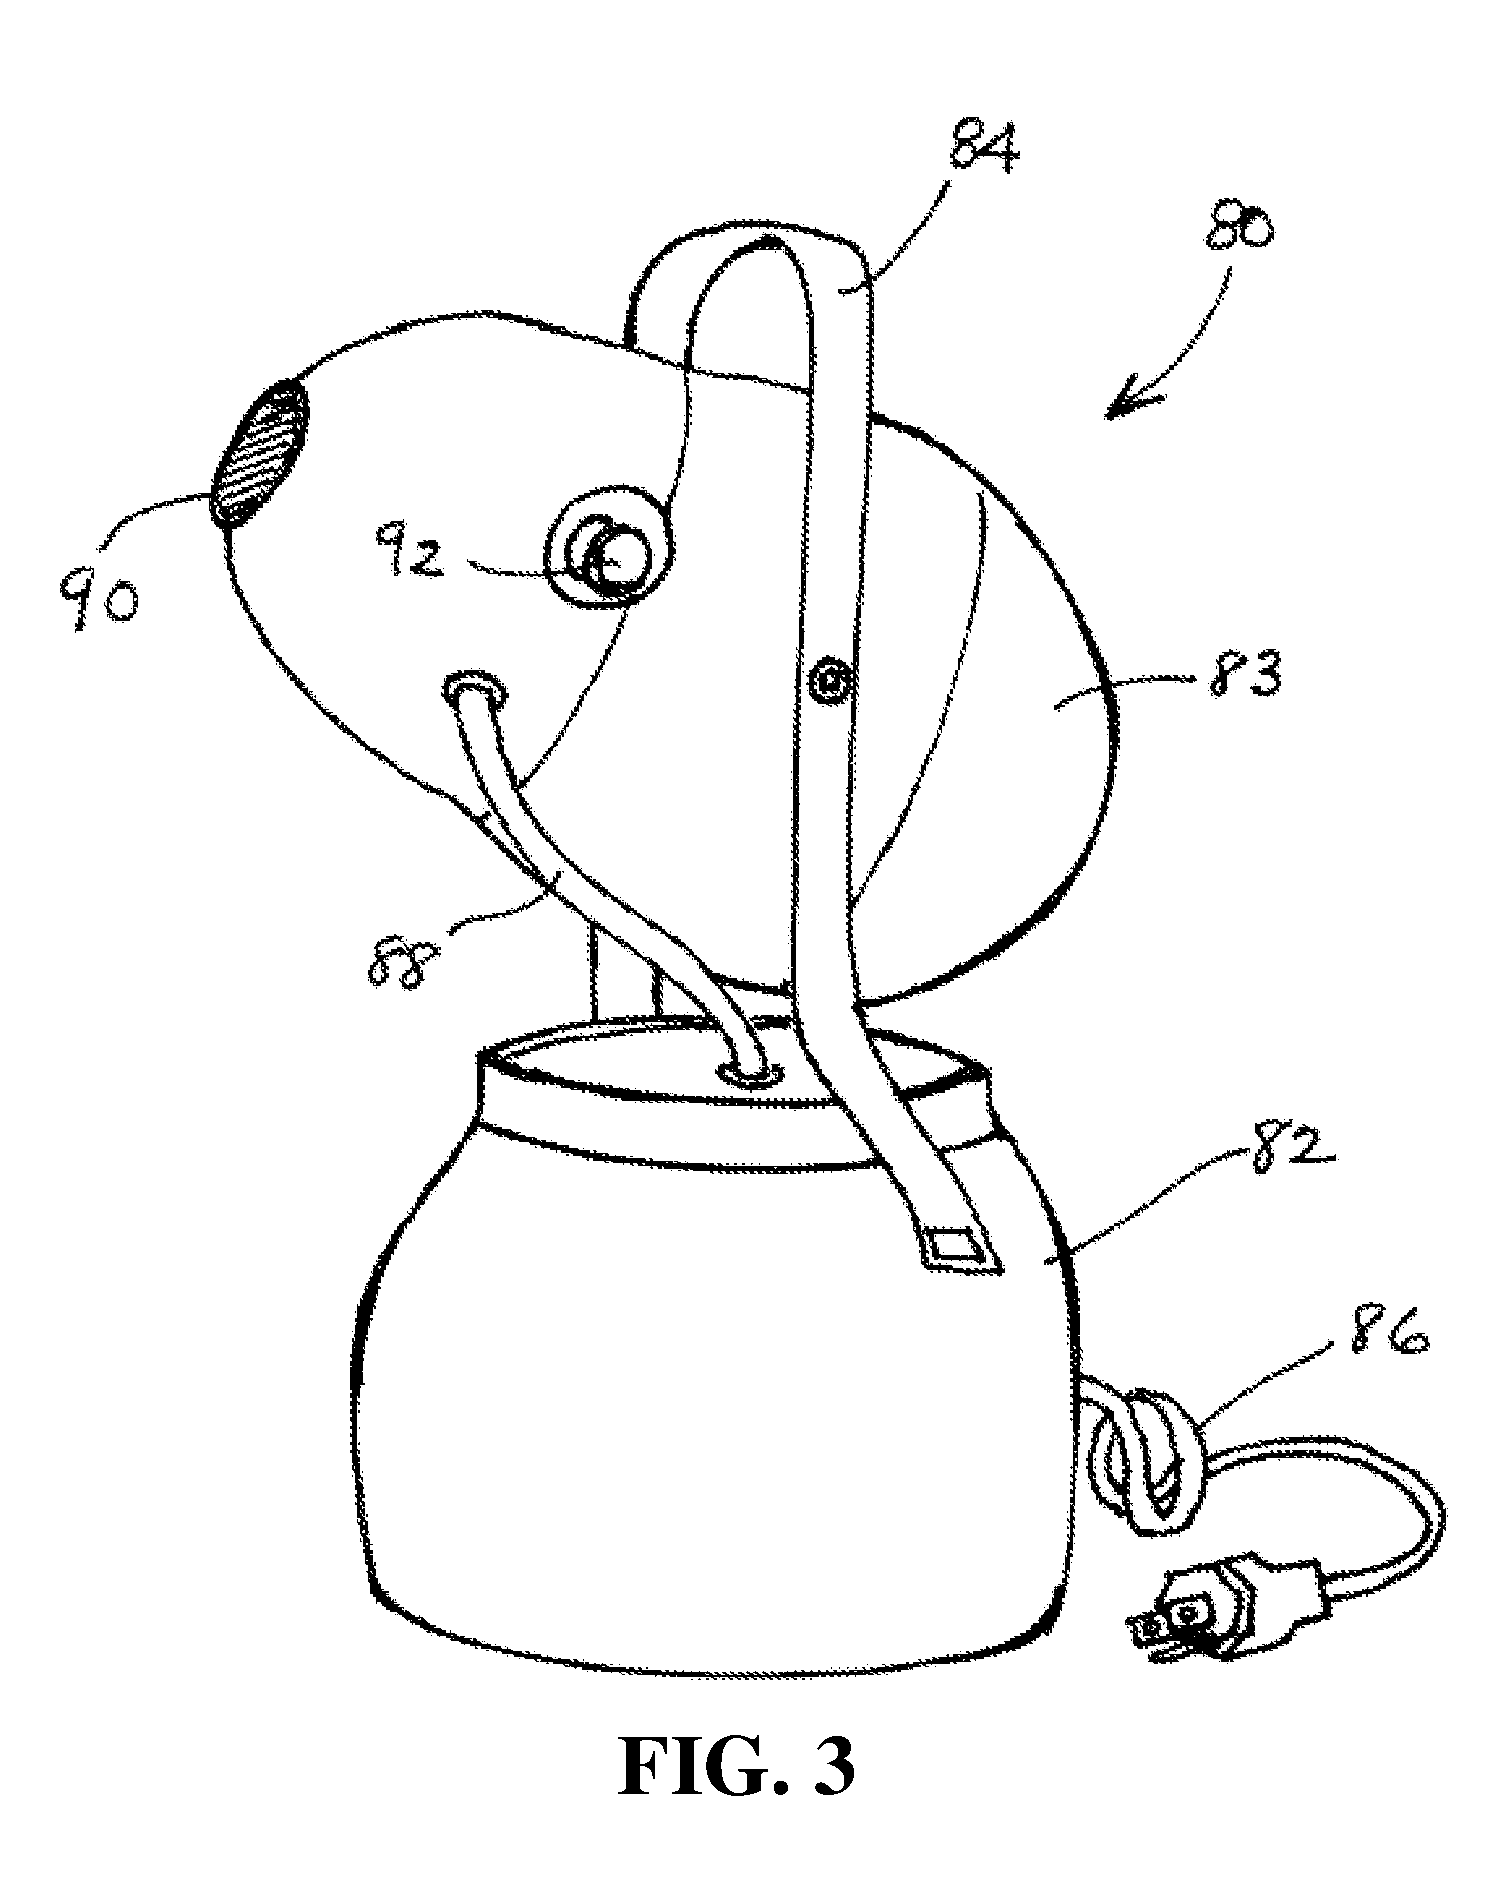 Pest-control compositions, and methods and products utilizing same